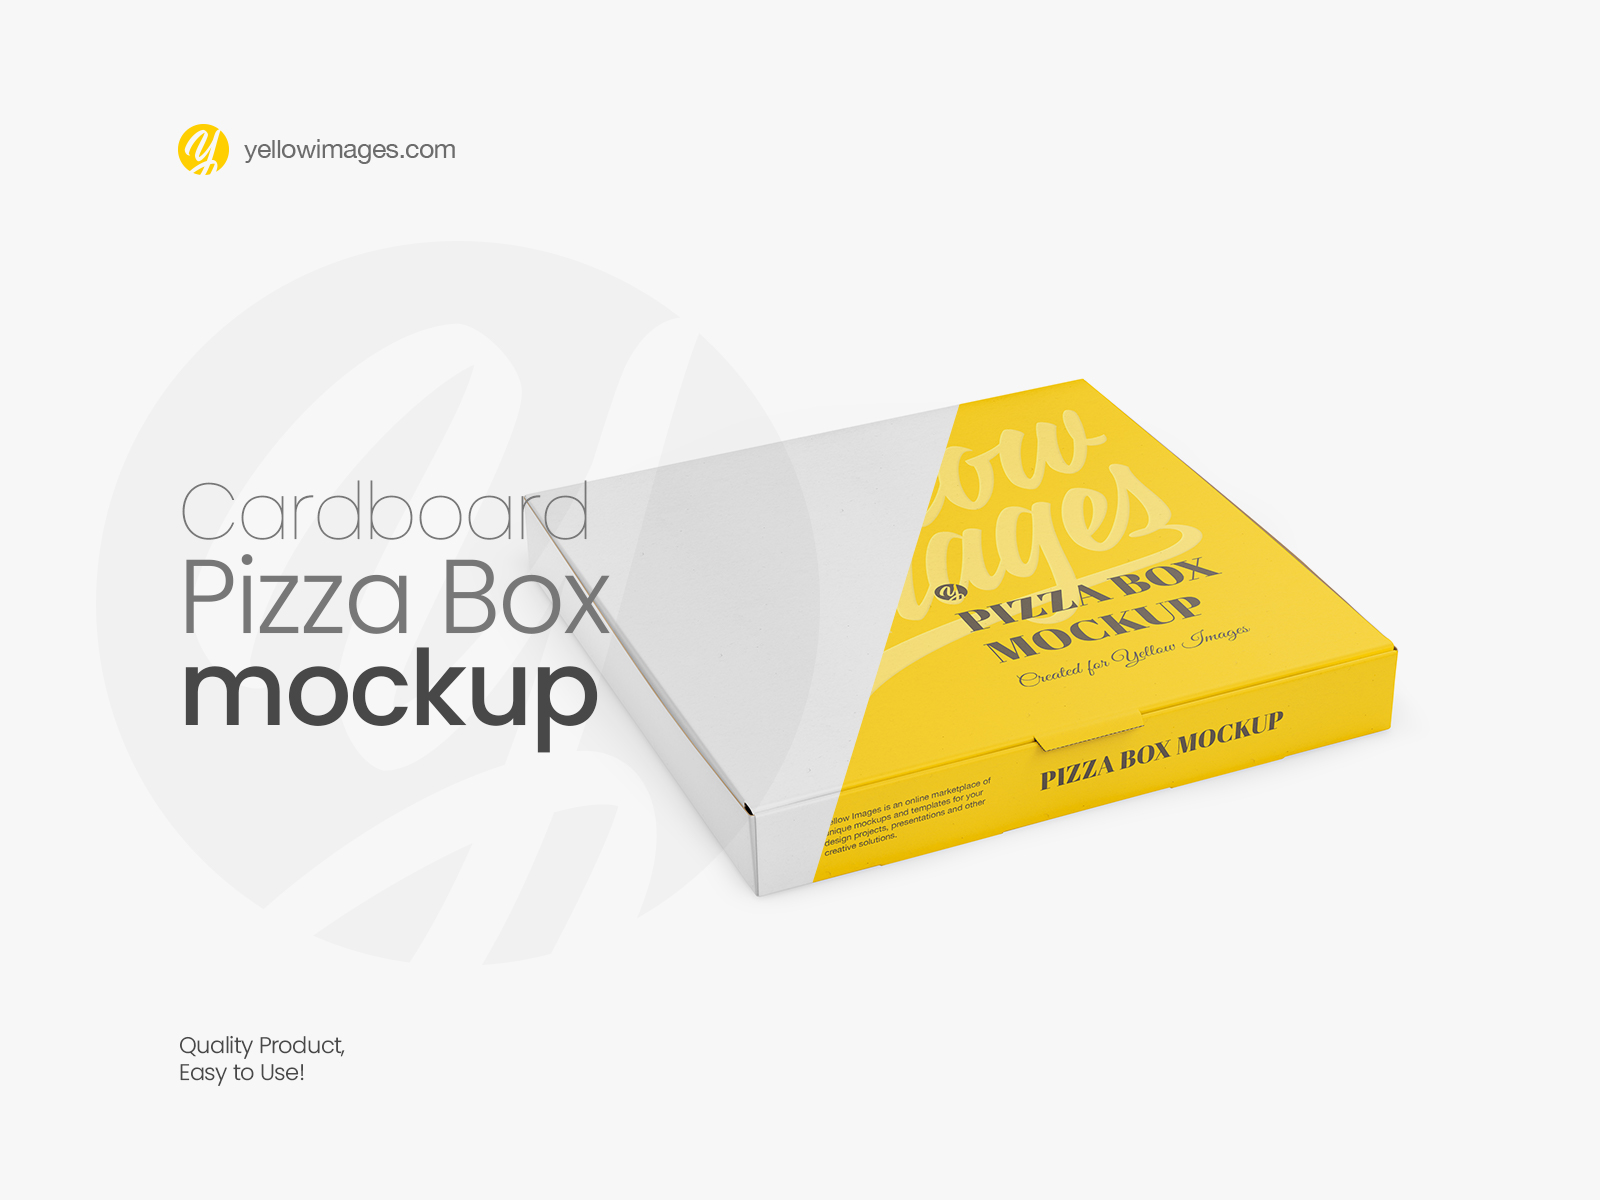 Download Food Box Mockup Psd Download Free And Premium Psd Mockup Templates And Design Assets Yellowimages Mockups